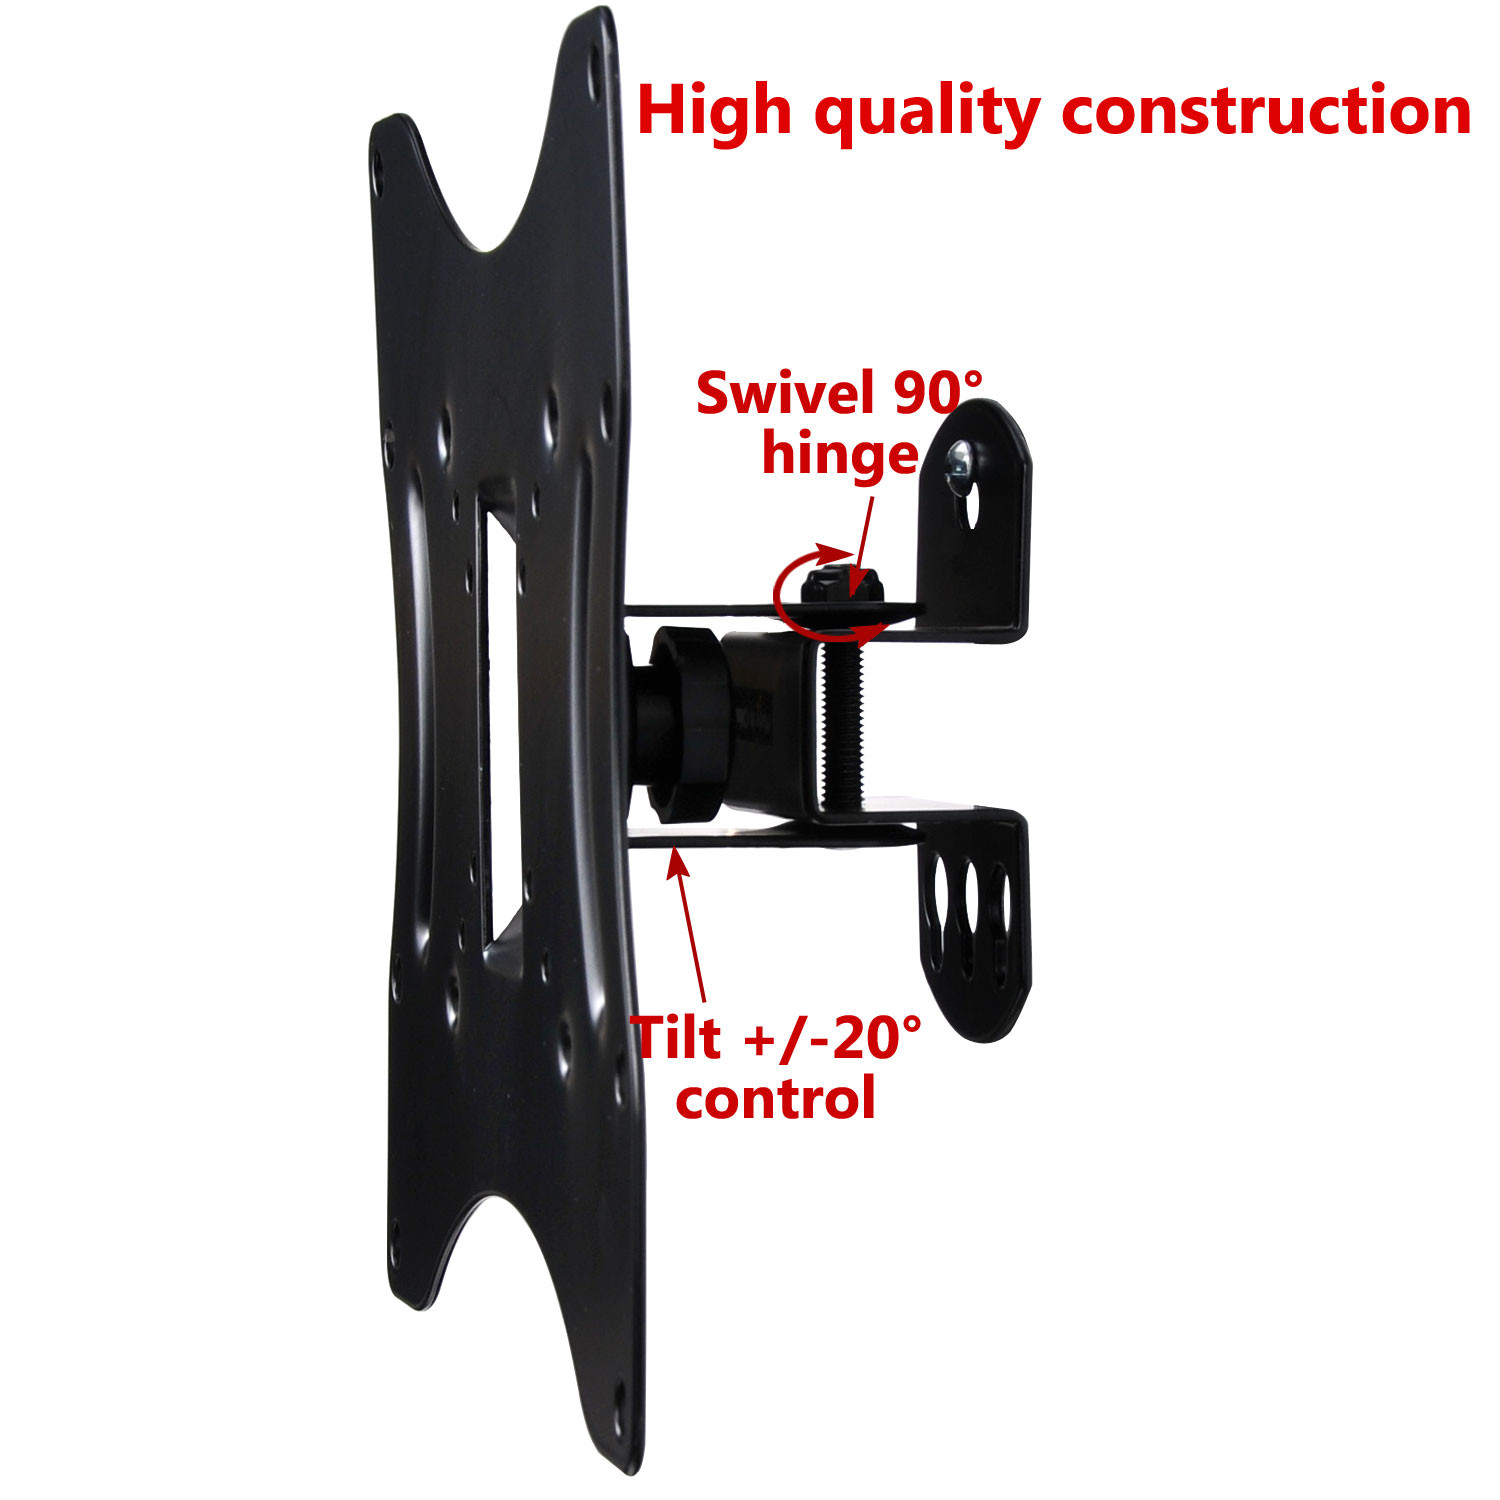 VideoSecu Tilt Swivel TV Wall Mount for Most 24-40" LED LCD HDTV VIZIO LG Samsung Flat Screen Mounting Hole 200/100/75mm BT1 - image 4 of 4